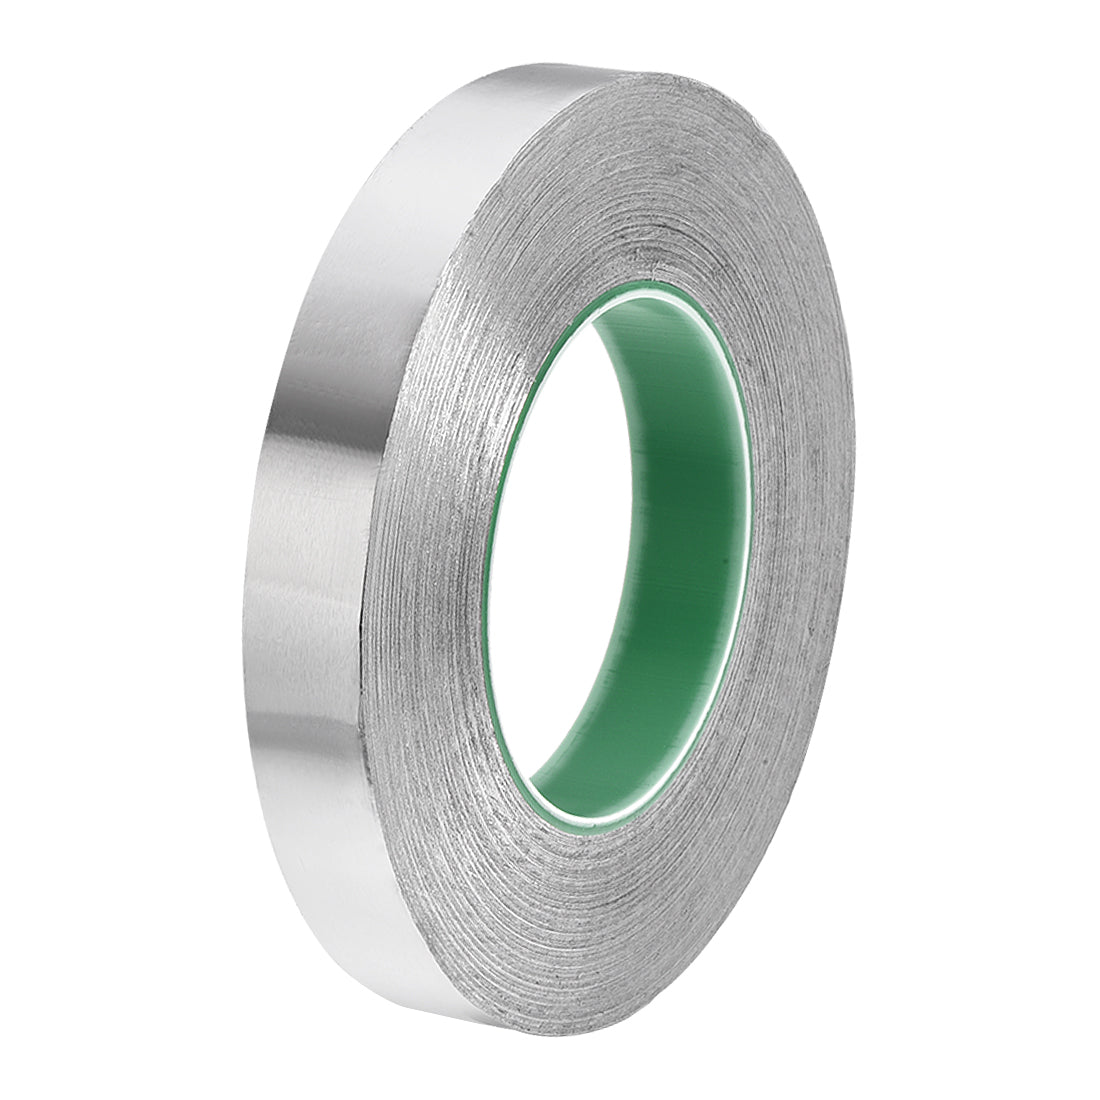 uxcell Uxcell 20mm Aluminum Foil Tape for HVAC,Patching Hot and Cold Air Ducts 50m/164ft